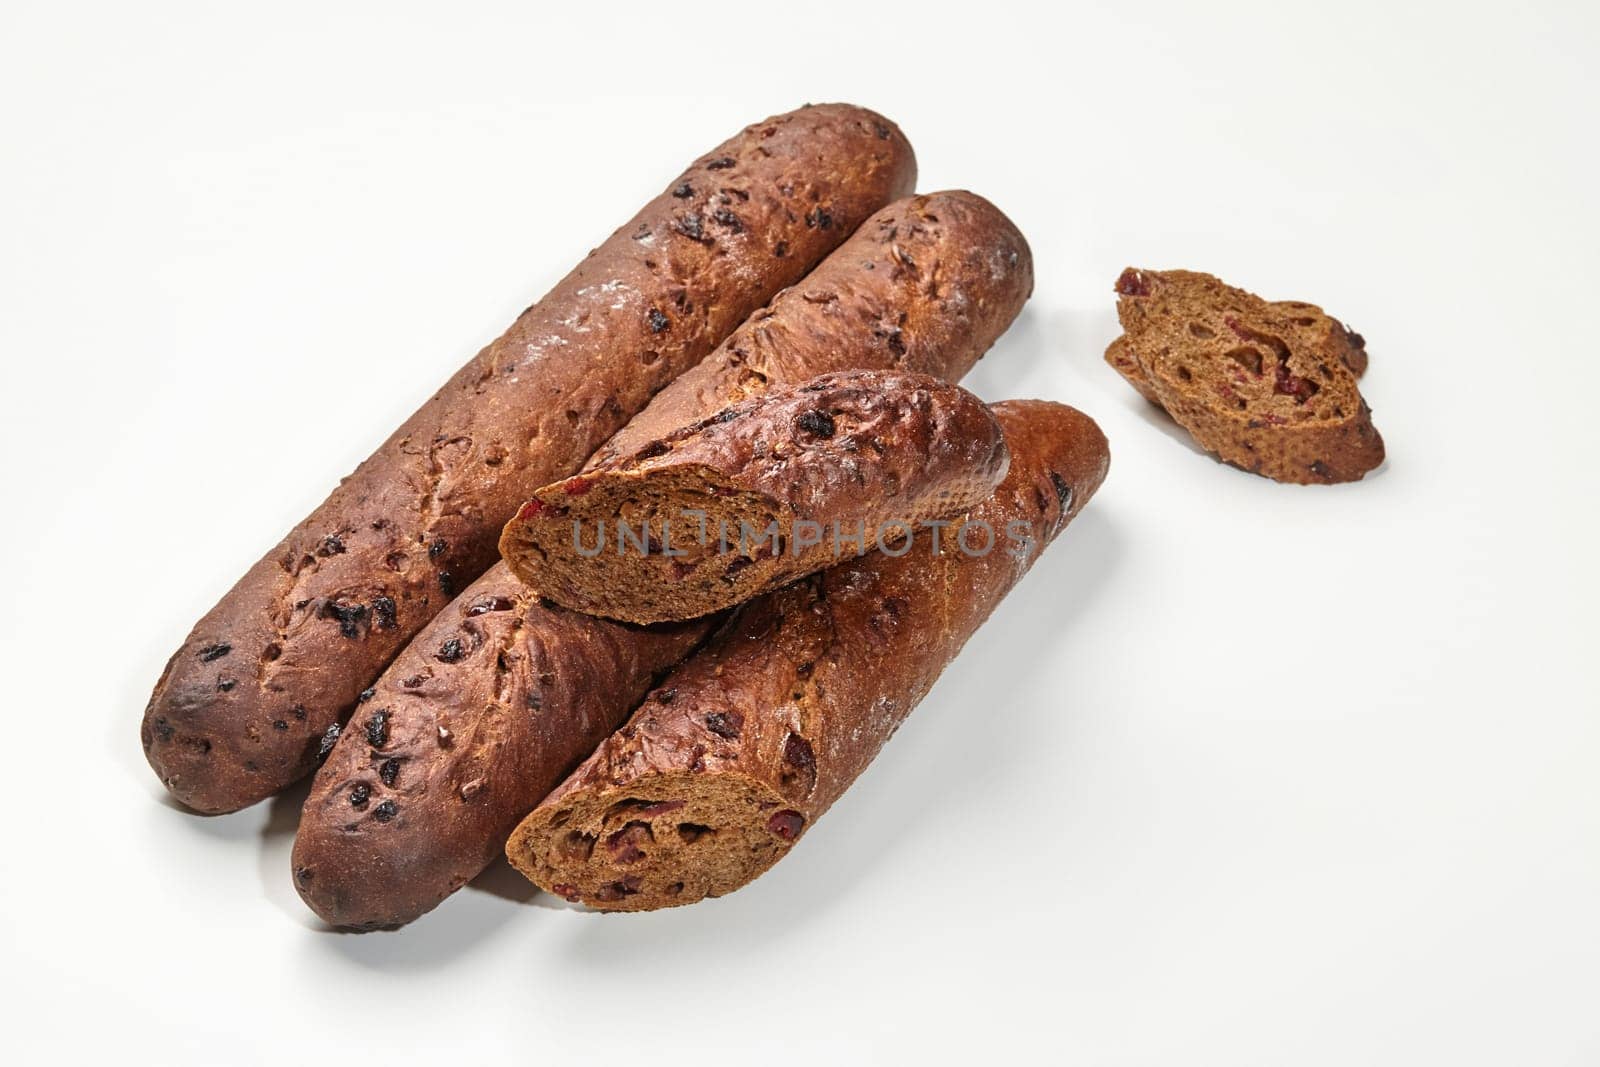 Dark rye baguette loaves with tart cranberries, featured in detailed close-up on white background. Artisan bakery products concept